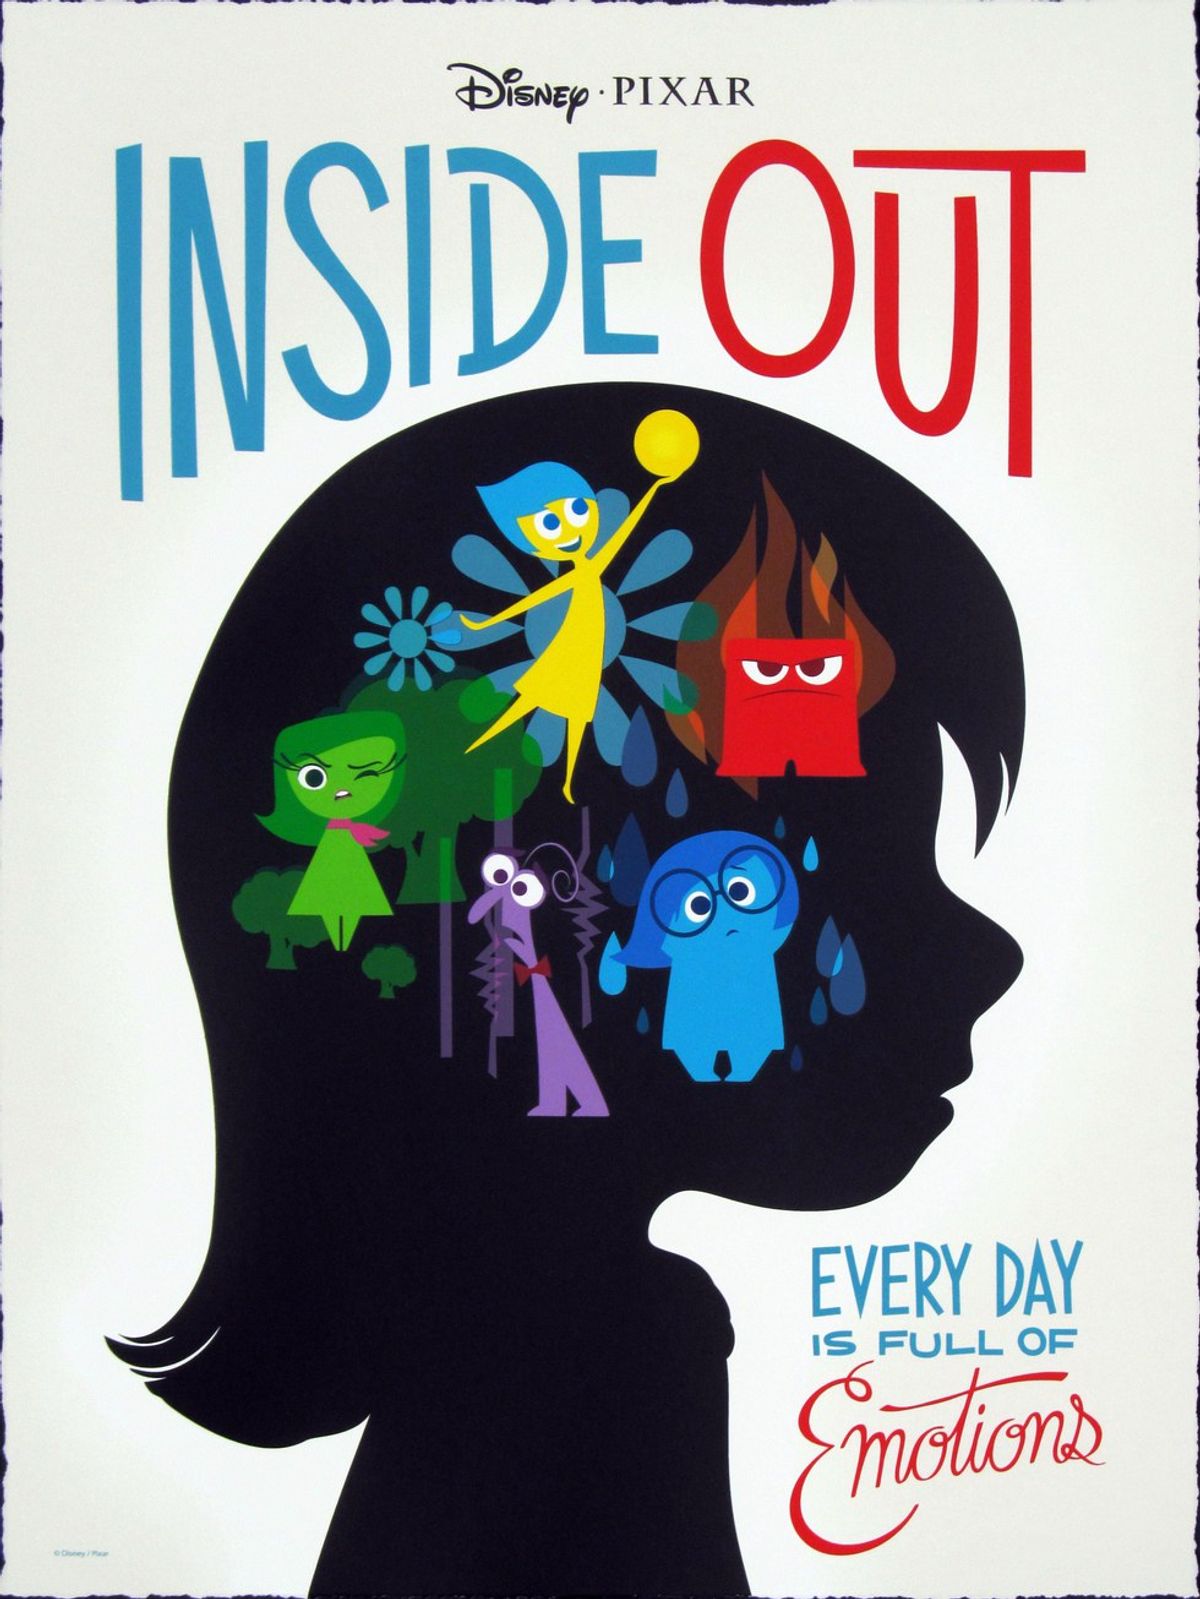 Movie Thoughts: Why Disney Pixar's "Inside Out" Needs A Sequel